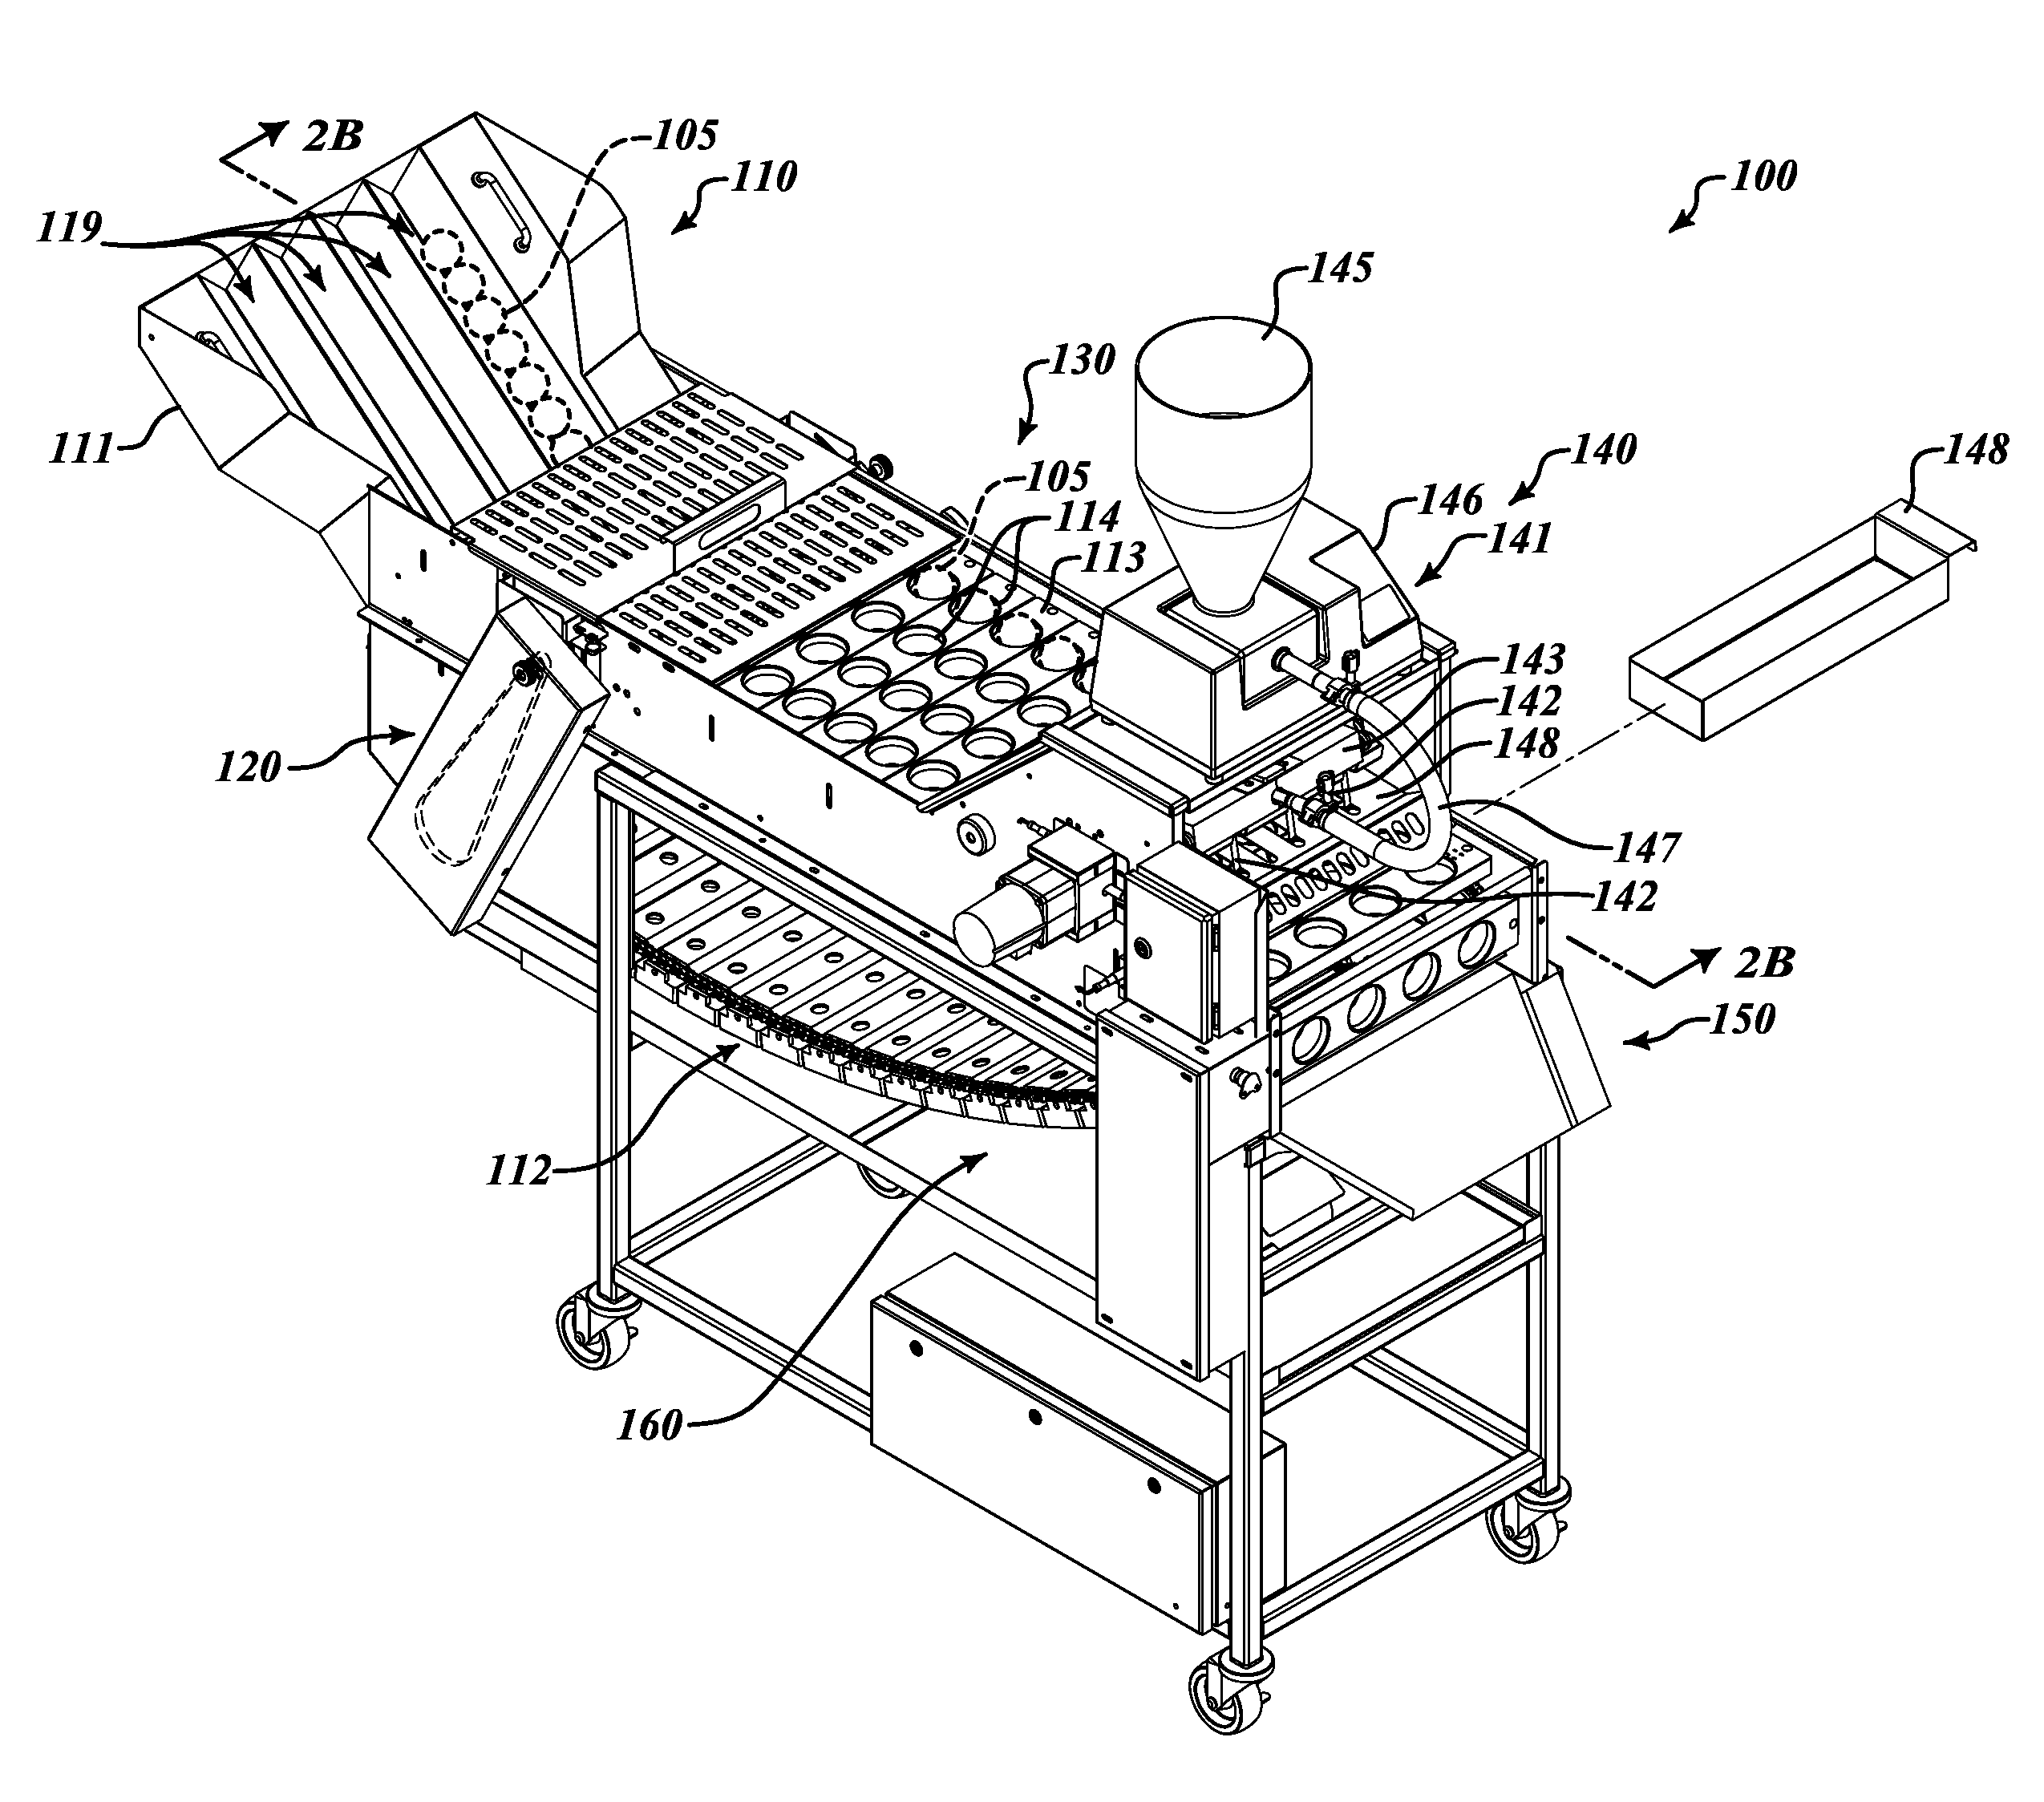 Devices, systems, and methods for filling doughnut holes